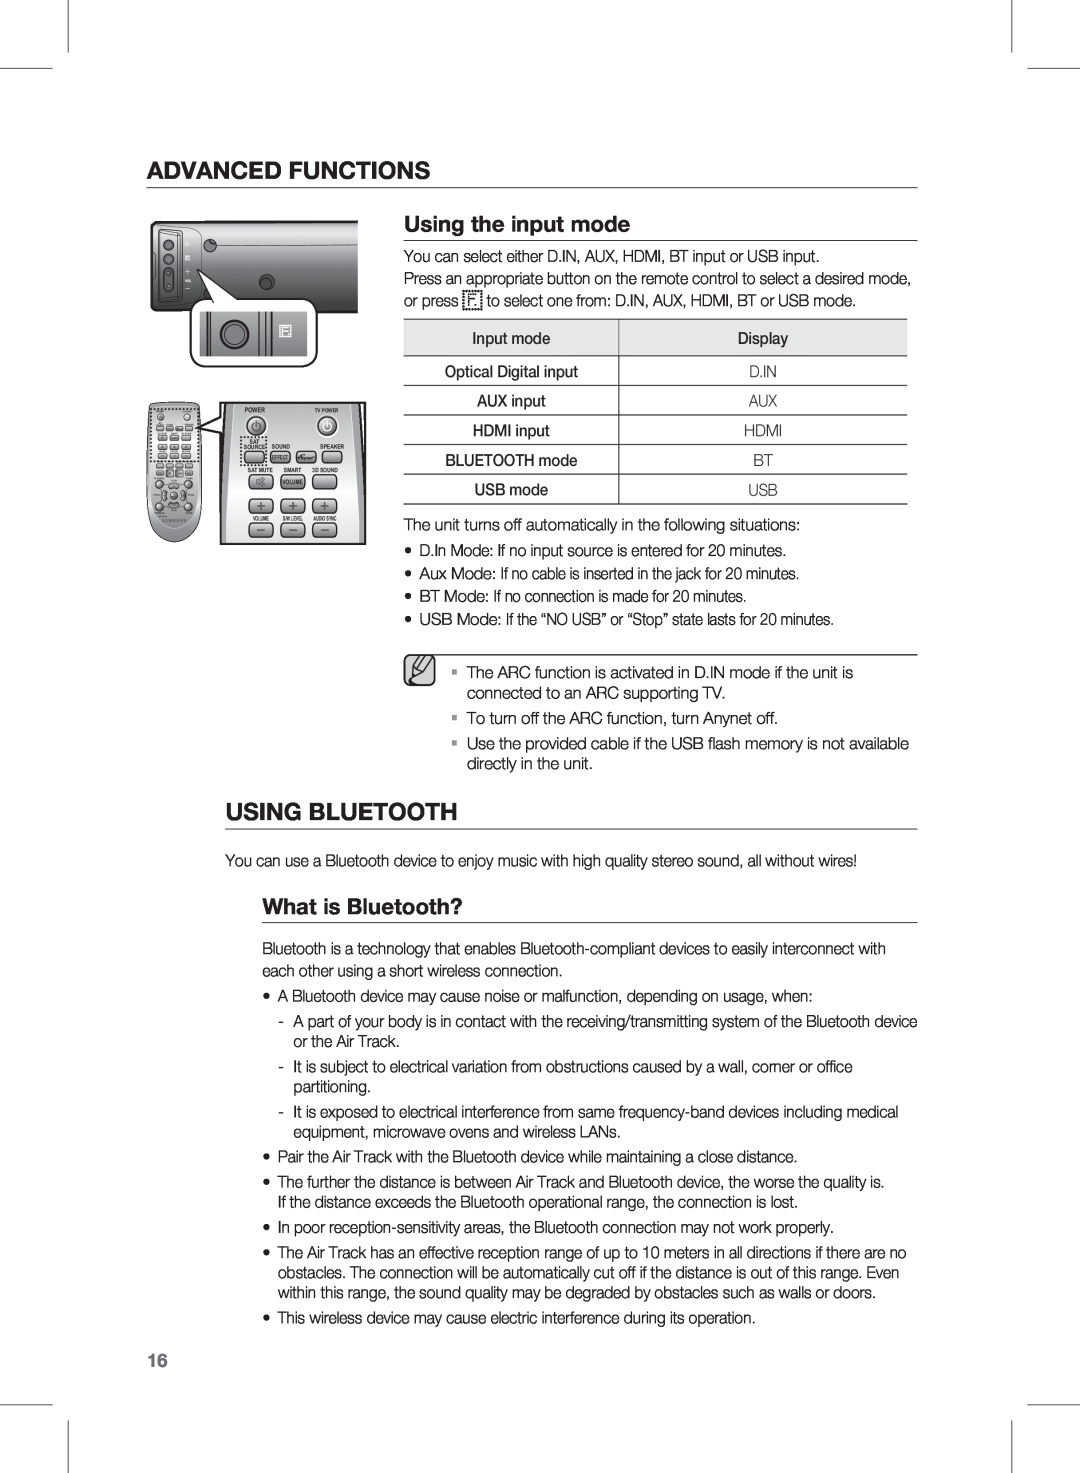 Samsung HW-E450 user manual advanced functions, Using BLUETOOTH, Using the input mode, What is Bluetooth? 